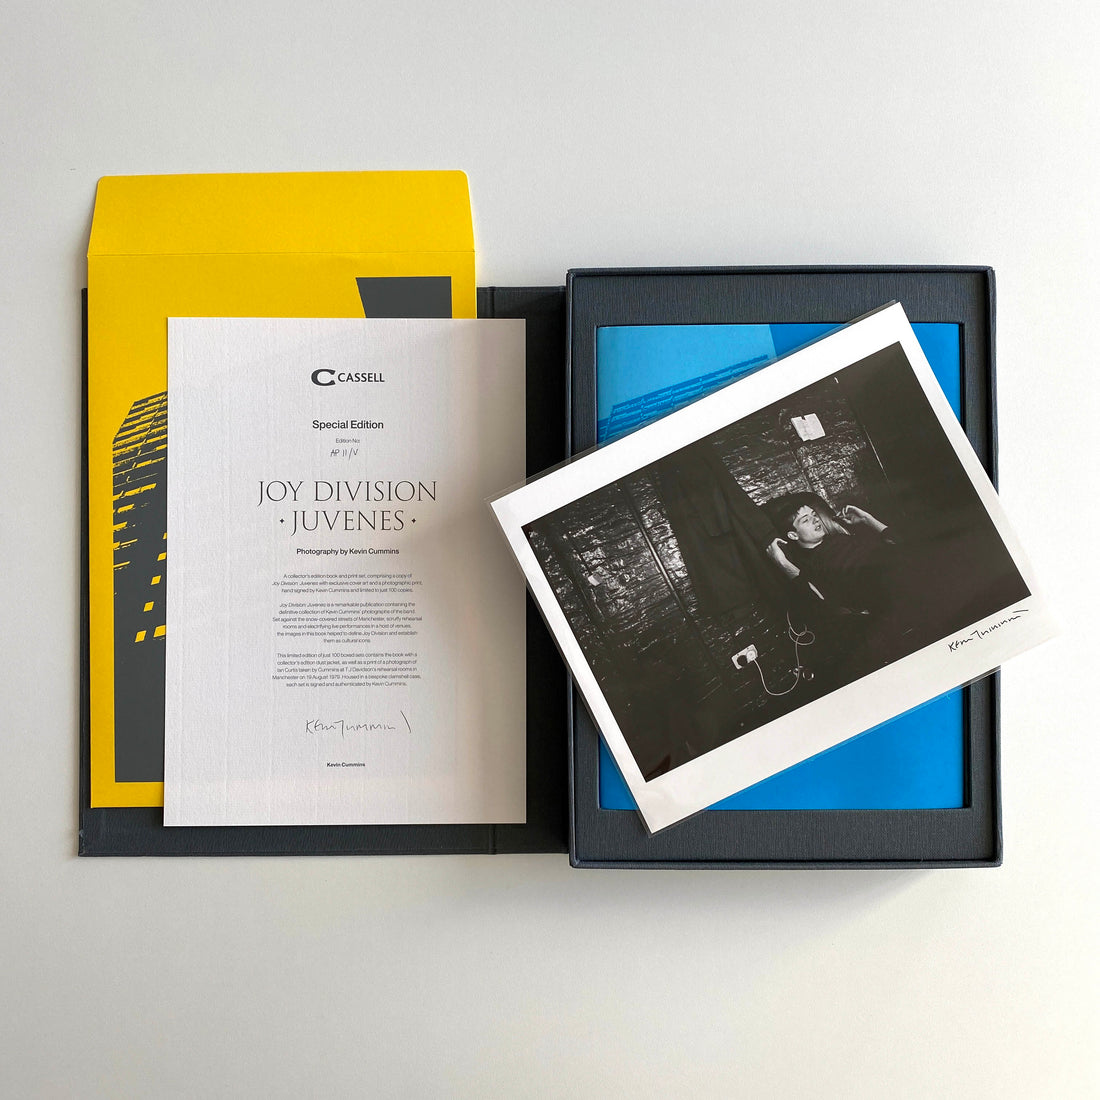 Kevin Cummins' Joy Division collectable photographic book is laid out in the clamshell case showing the signed black and white photo of Joy Division, certificate of authenticity and envelope